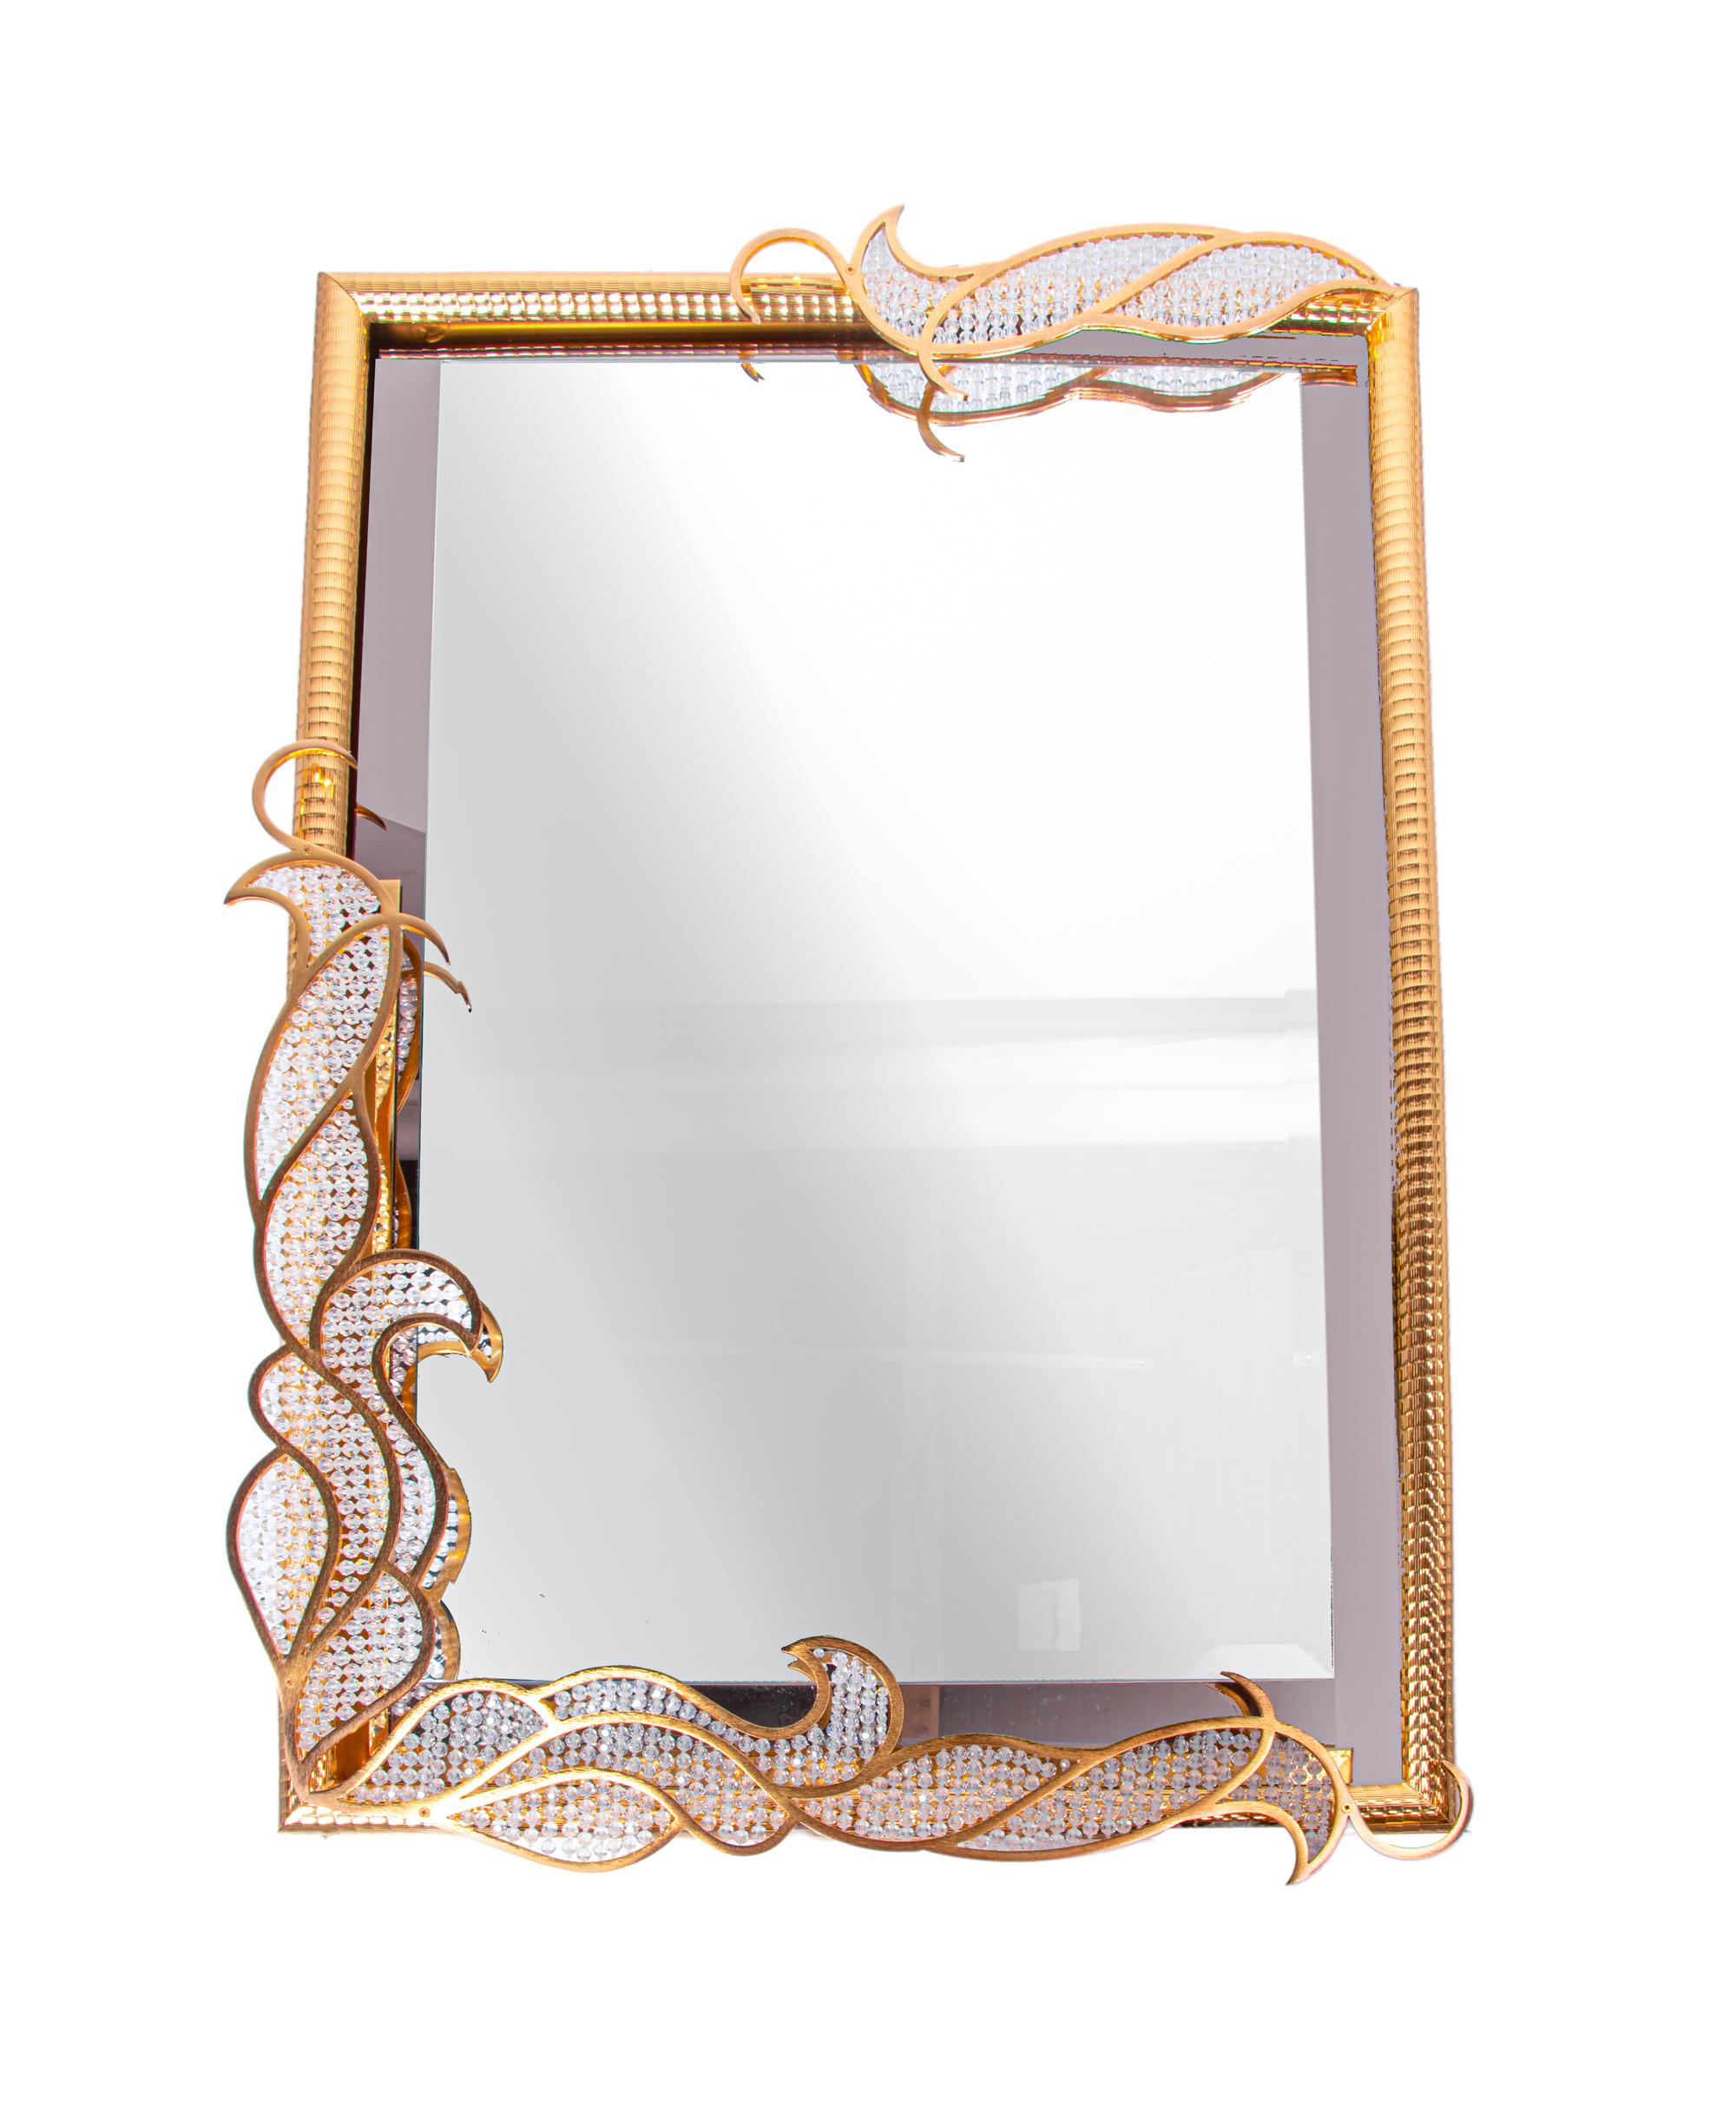 Majestic backlit mirror by Kurt Faustig with applications of Swarovski crystal elements screwing mounted on a gilded brass structure. 
 
A precious manufacturing of gold plated filigree with Swarovski crystal glass. Very heavy duty. High quality